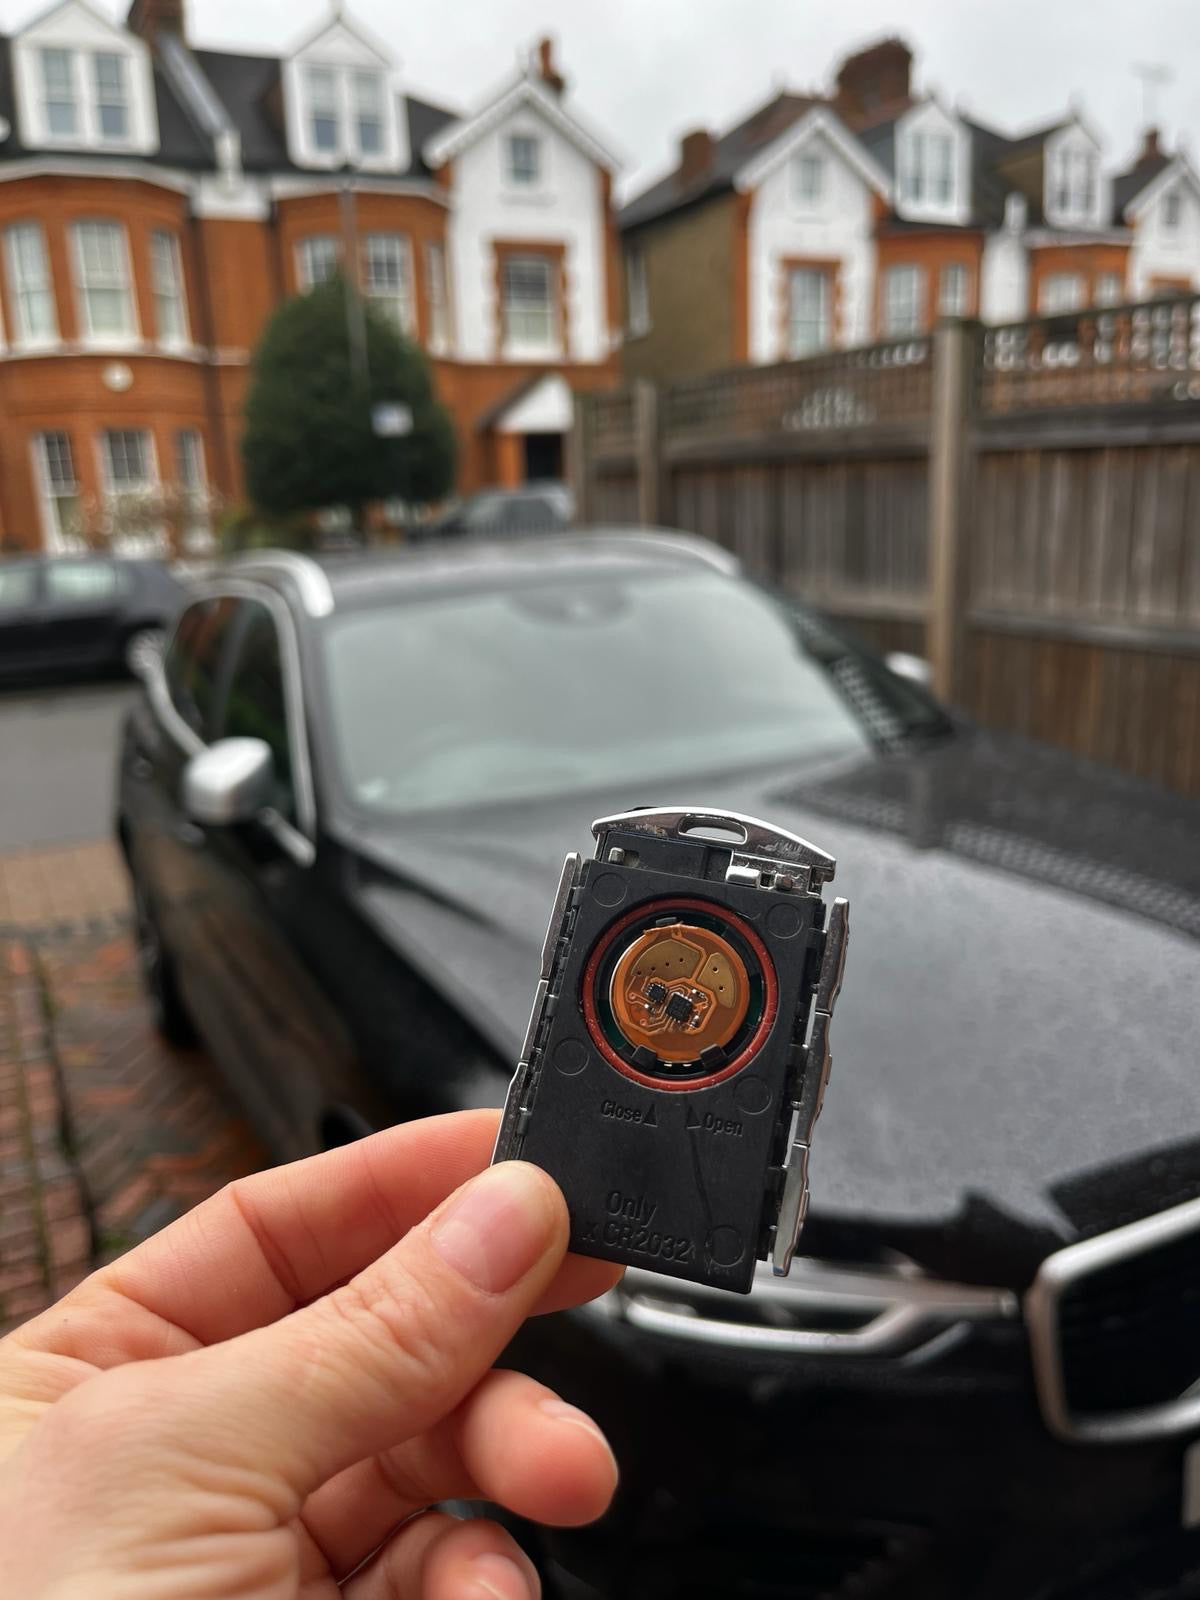 Volvo car key with KEYSHIELD anti-theft security sleeve installed to prevent stolen car